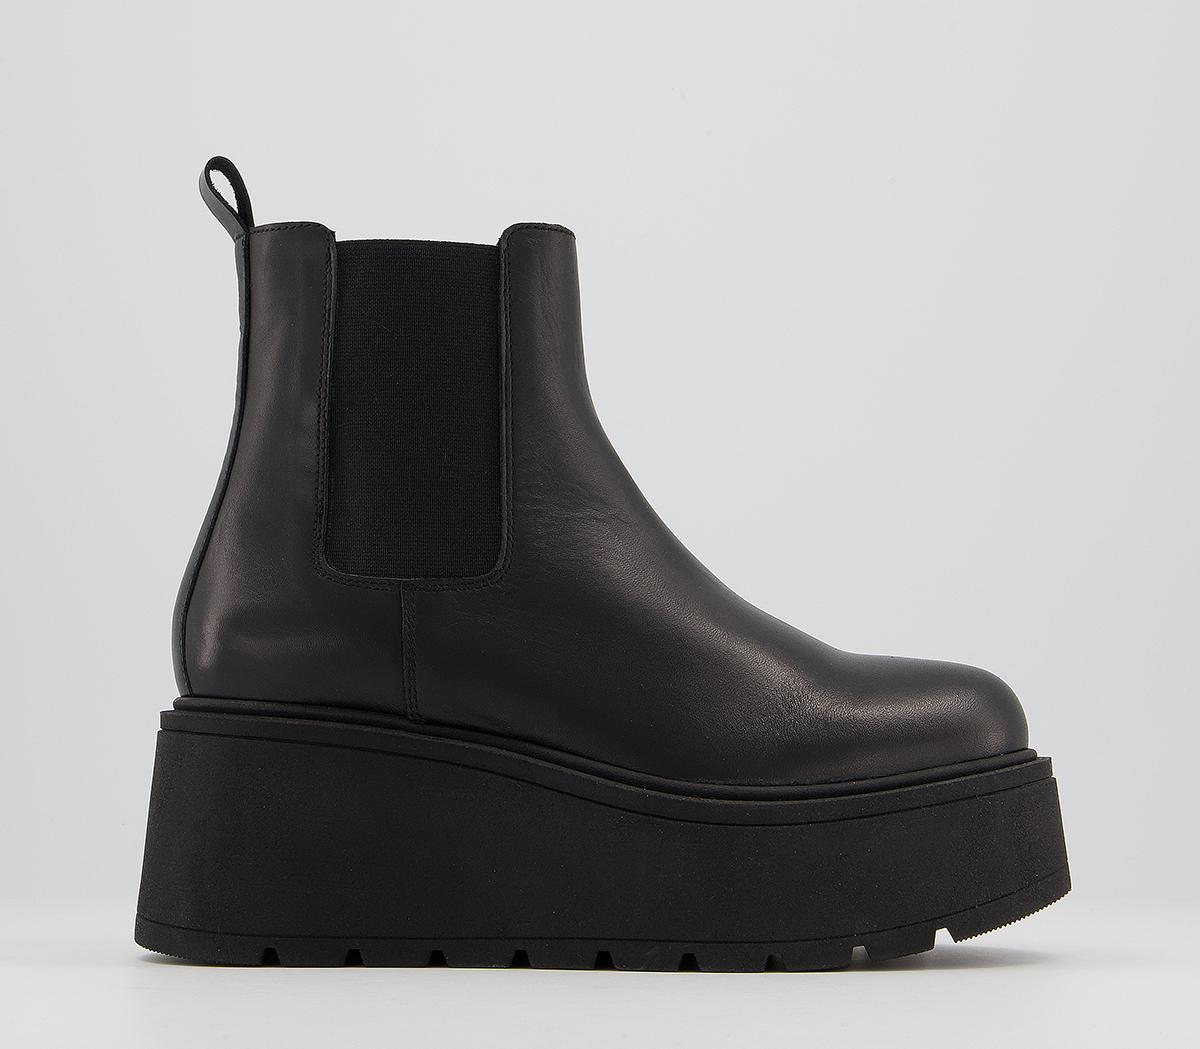 Office Acquire Wedge Chelsea Boots Black Leather - Ankle Boots